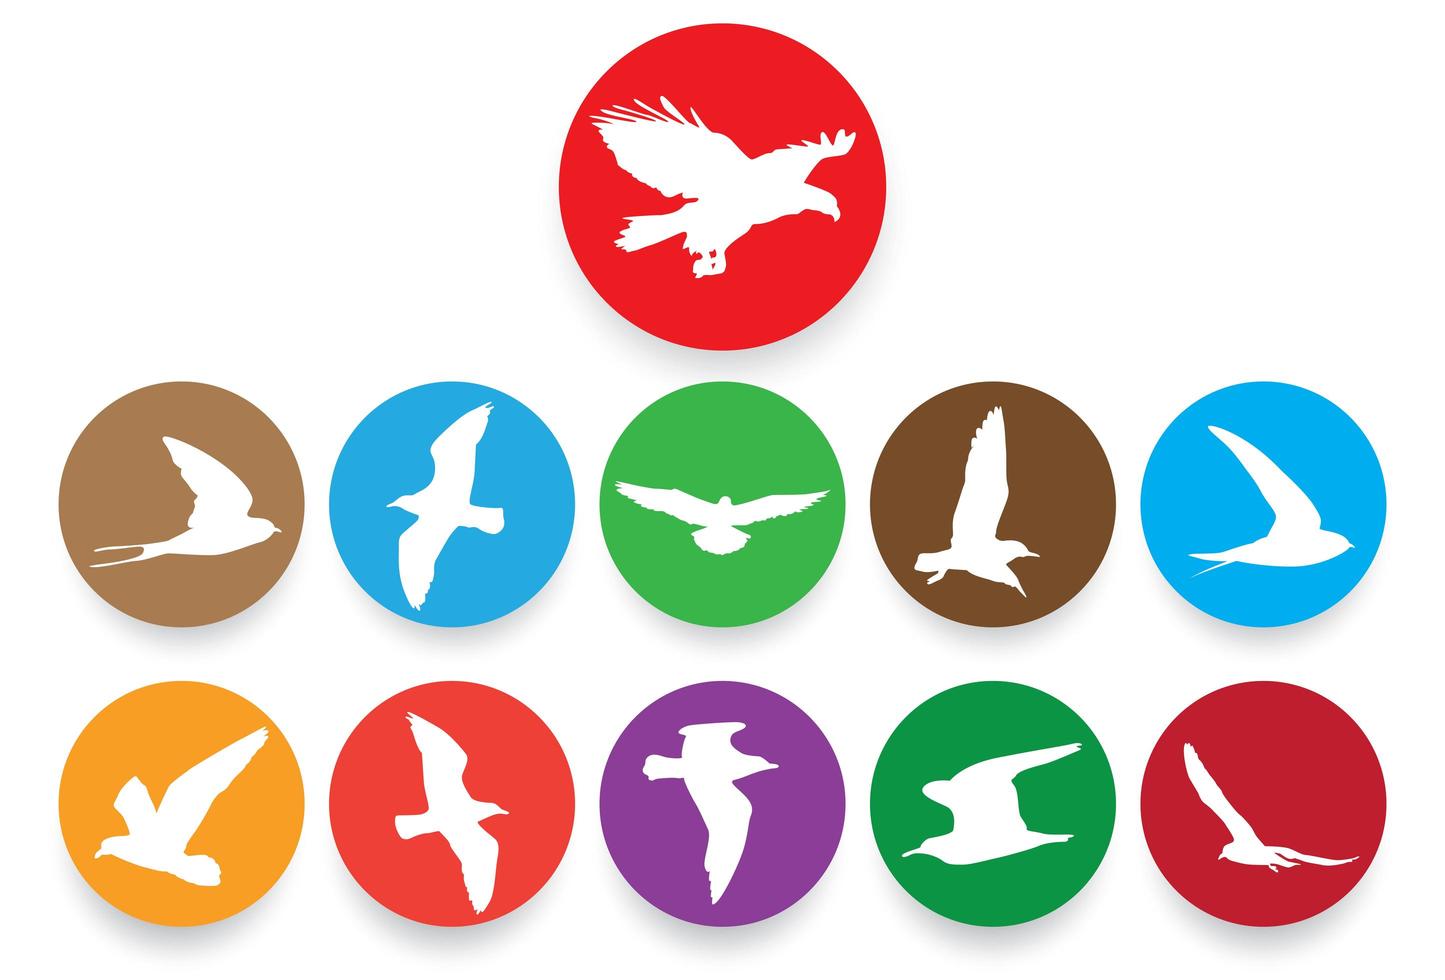 Flying bird silhouettes in colorful circles vector